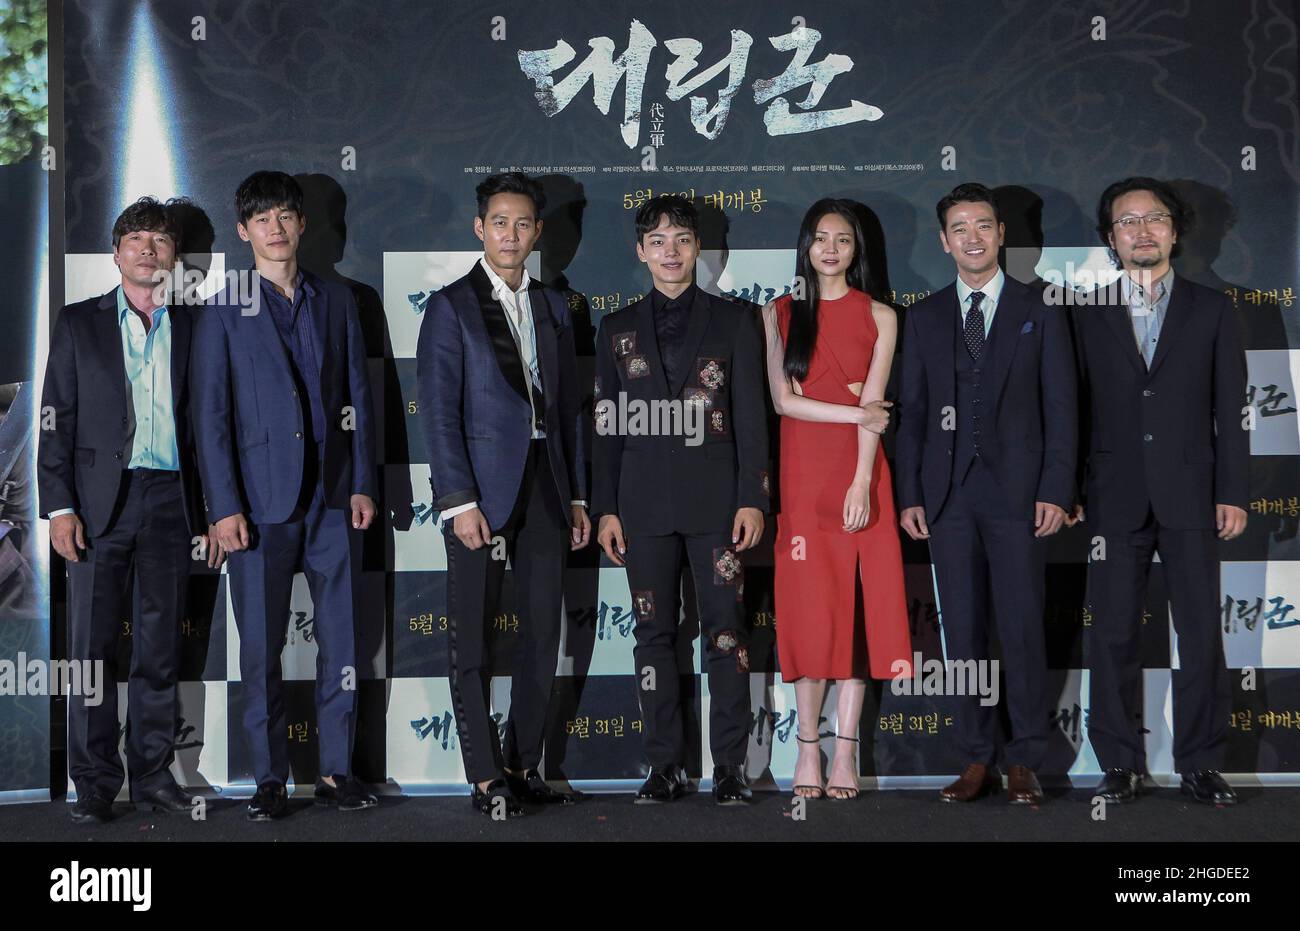 From left Actor Park Won Sang, Kim Mu Yeol, Lee Jung Jae, Yeo Jin Goo, Actress Esom, Actor Bae Soo Hyun, Director Jeong Yoon Cheol stand pose for photo call during their new film WARRIORS OF THE DAWN media show case in Seoul, South Korea. Stock Photo